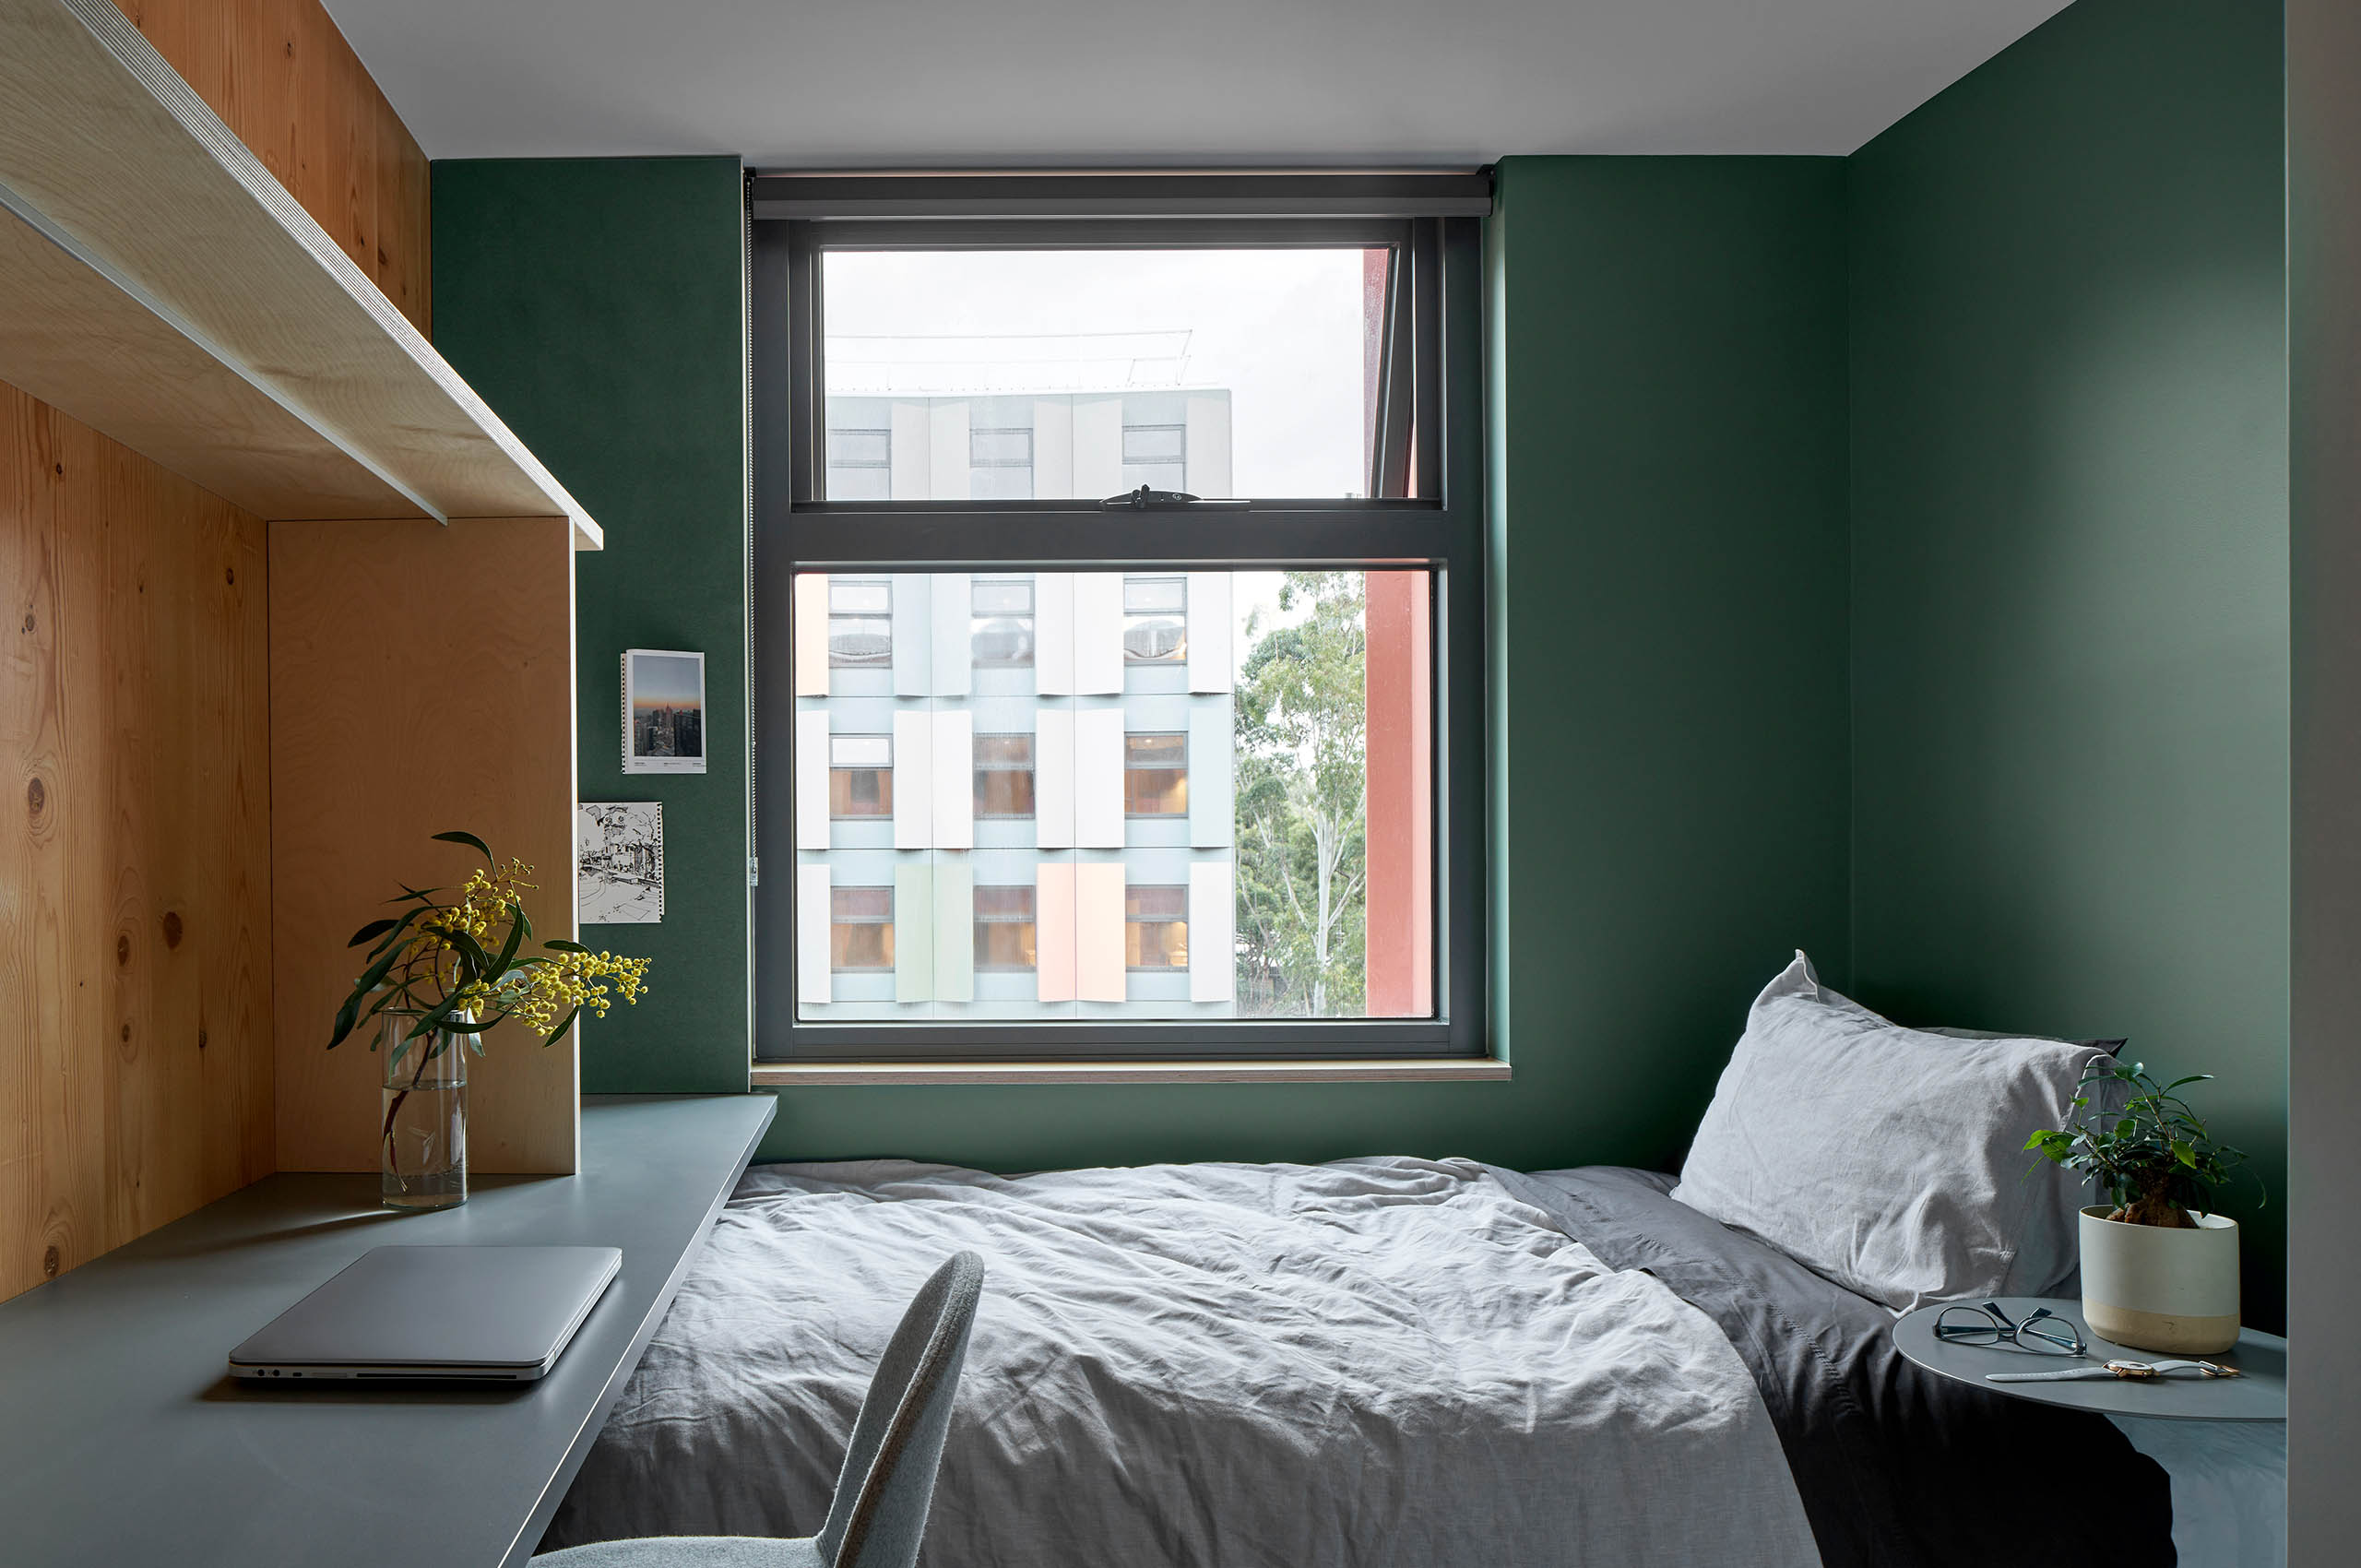 An example of a bedroom in a shared apartment. Each room has an exposed Cross Laminated Timber feature wall.